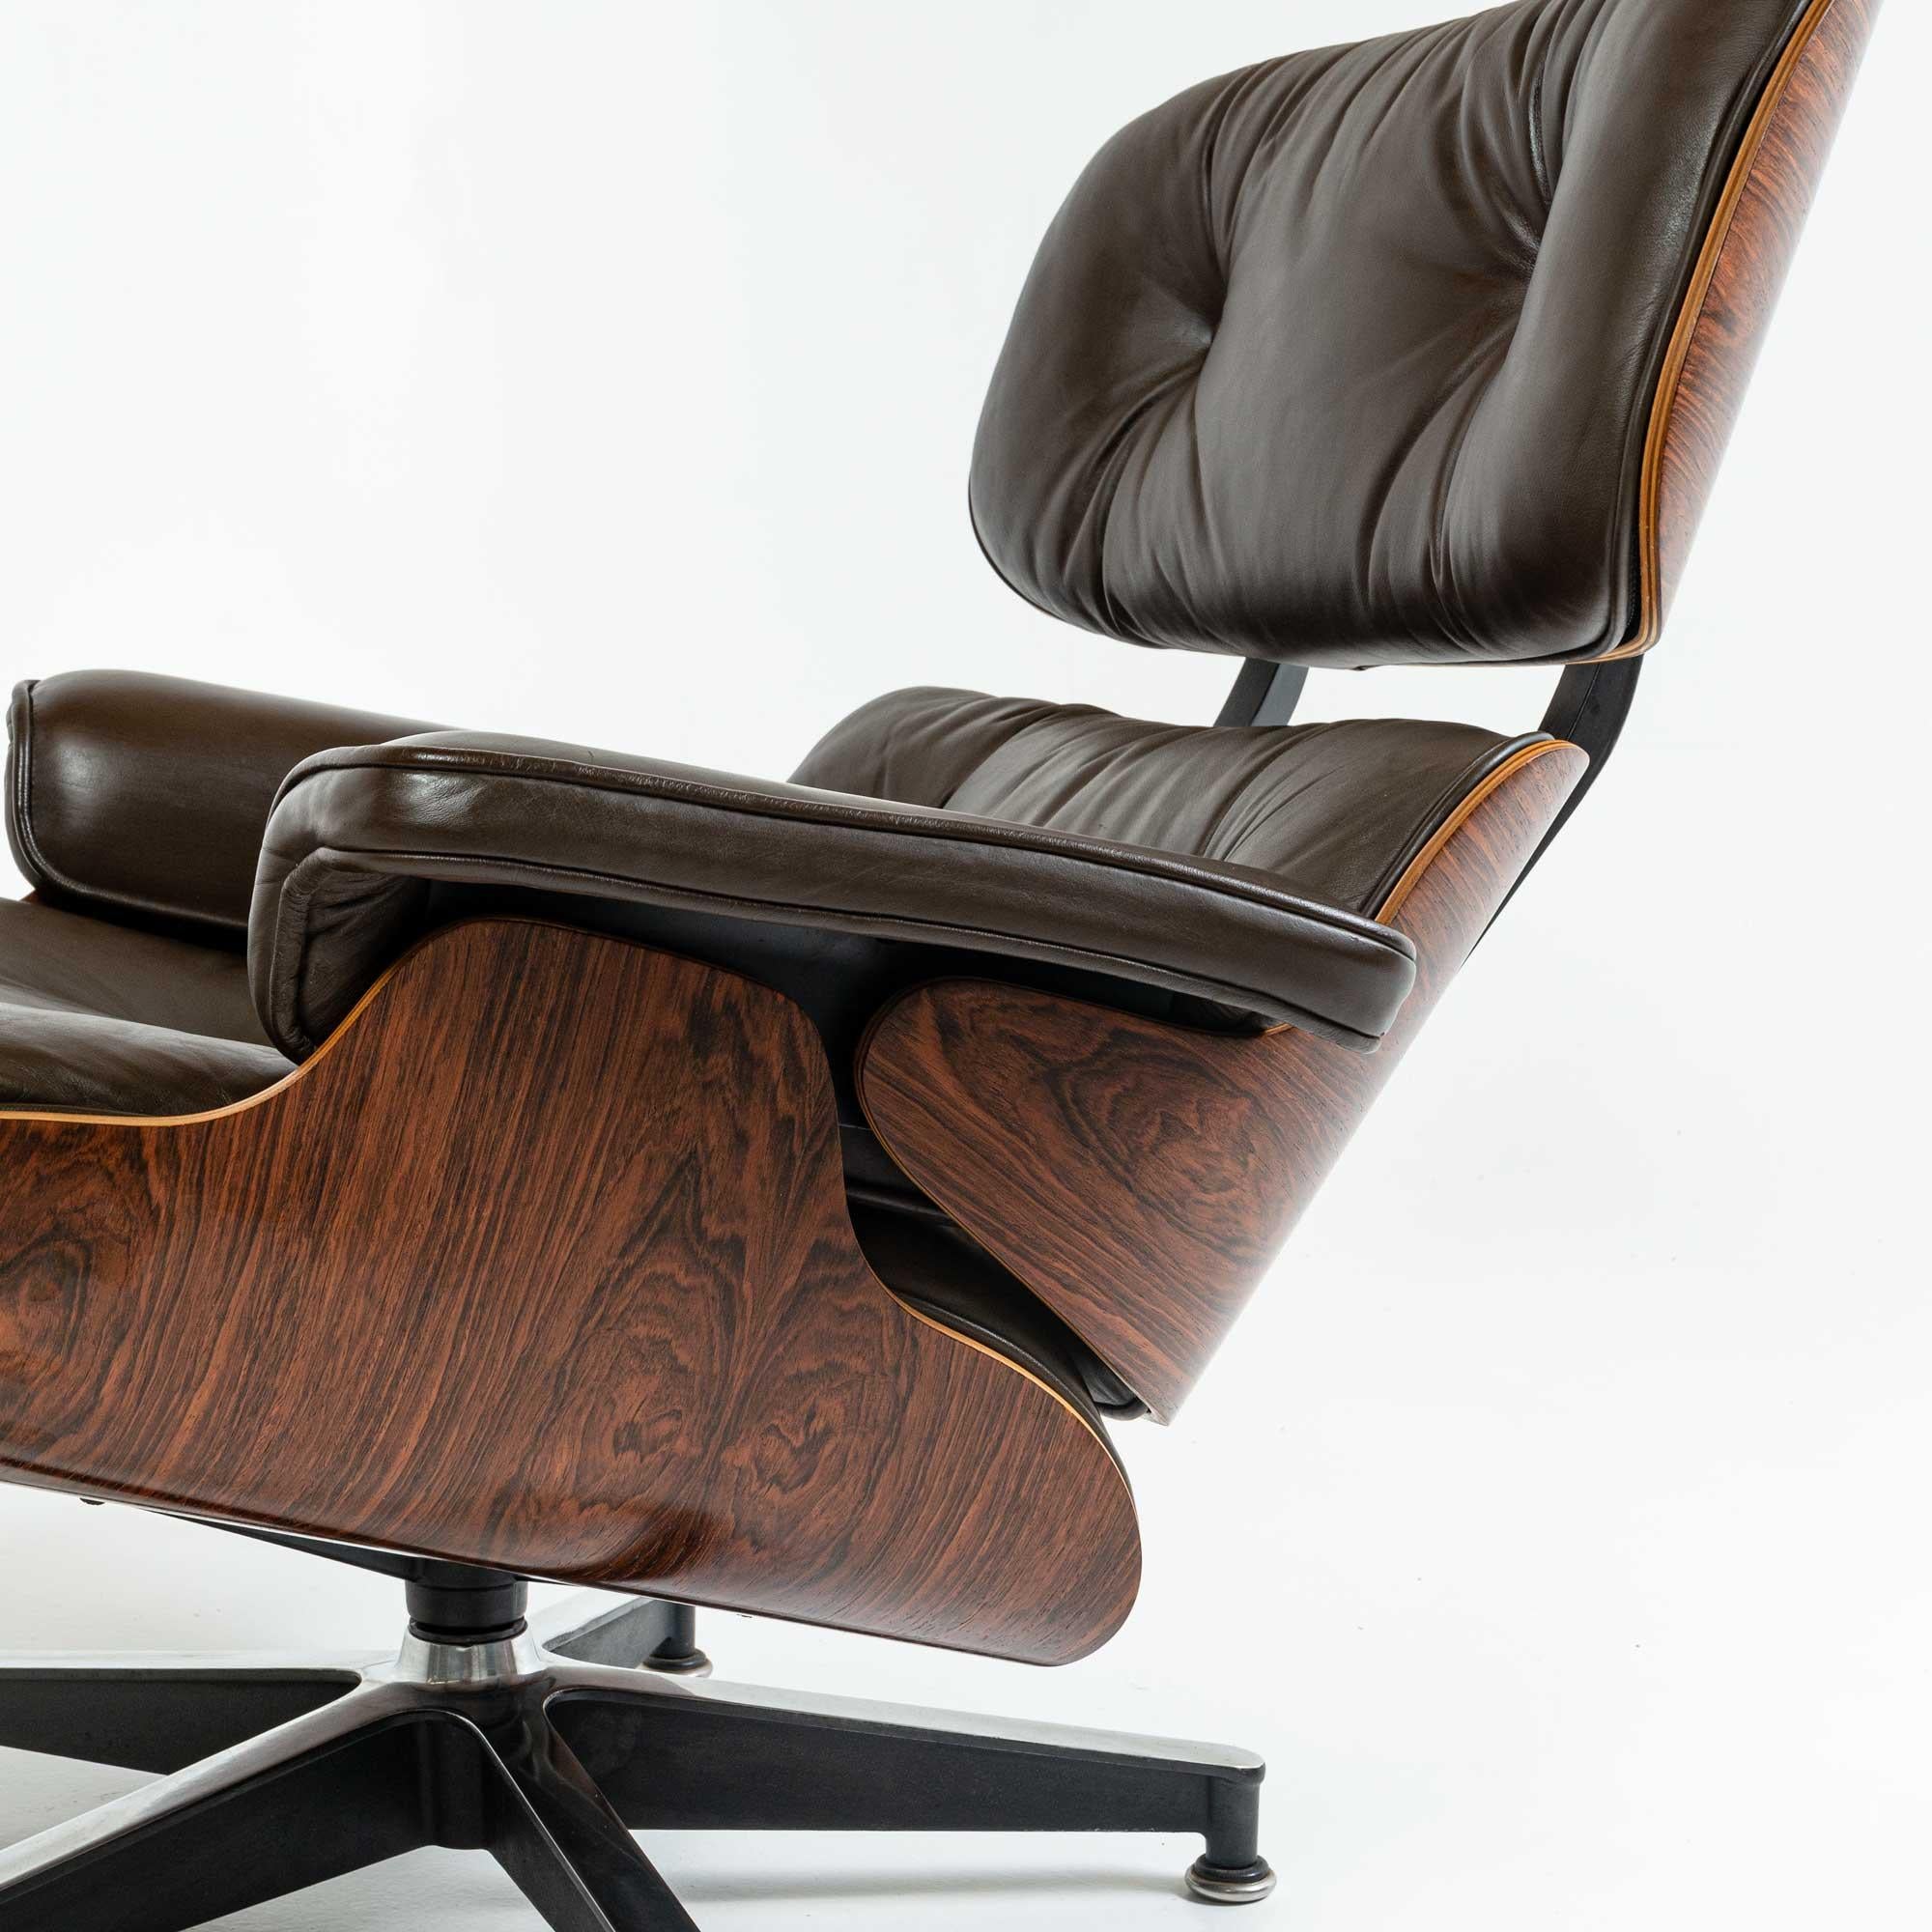 3rd Gen Eames Lounge Chair 670-671 in Original Chocolate Leather In Good Condition For Sale In Seattle, WA